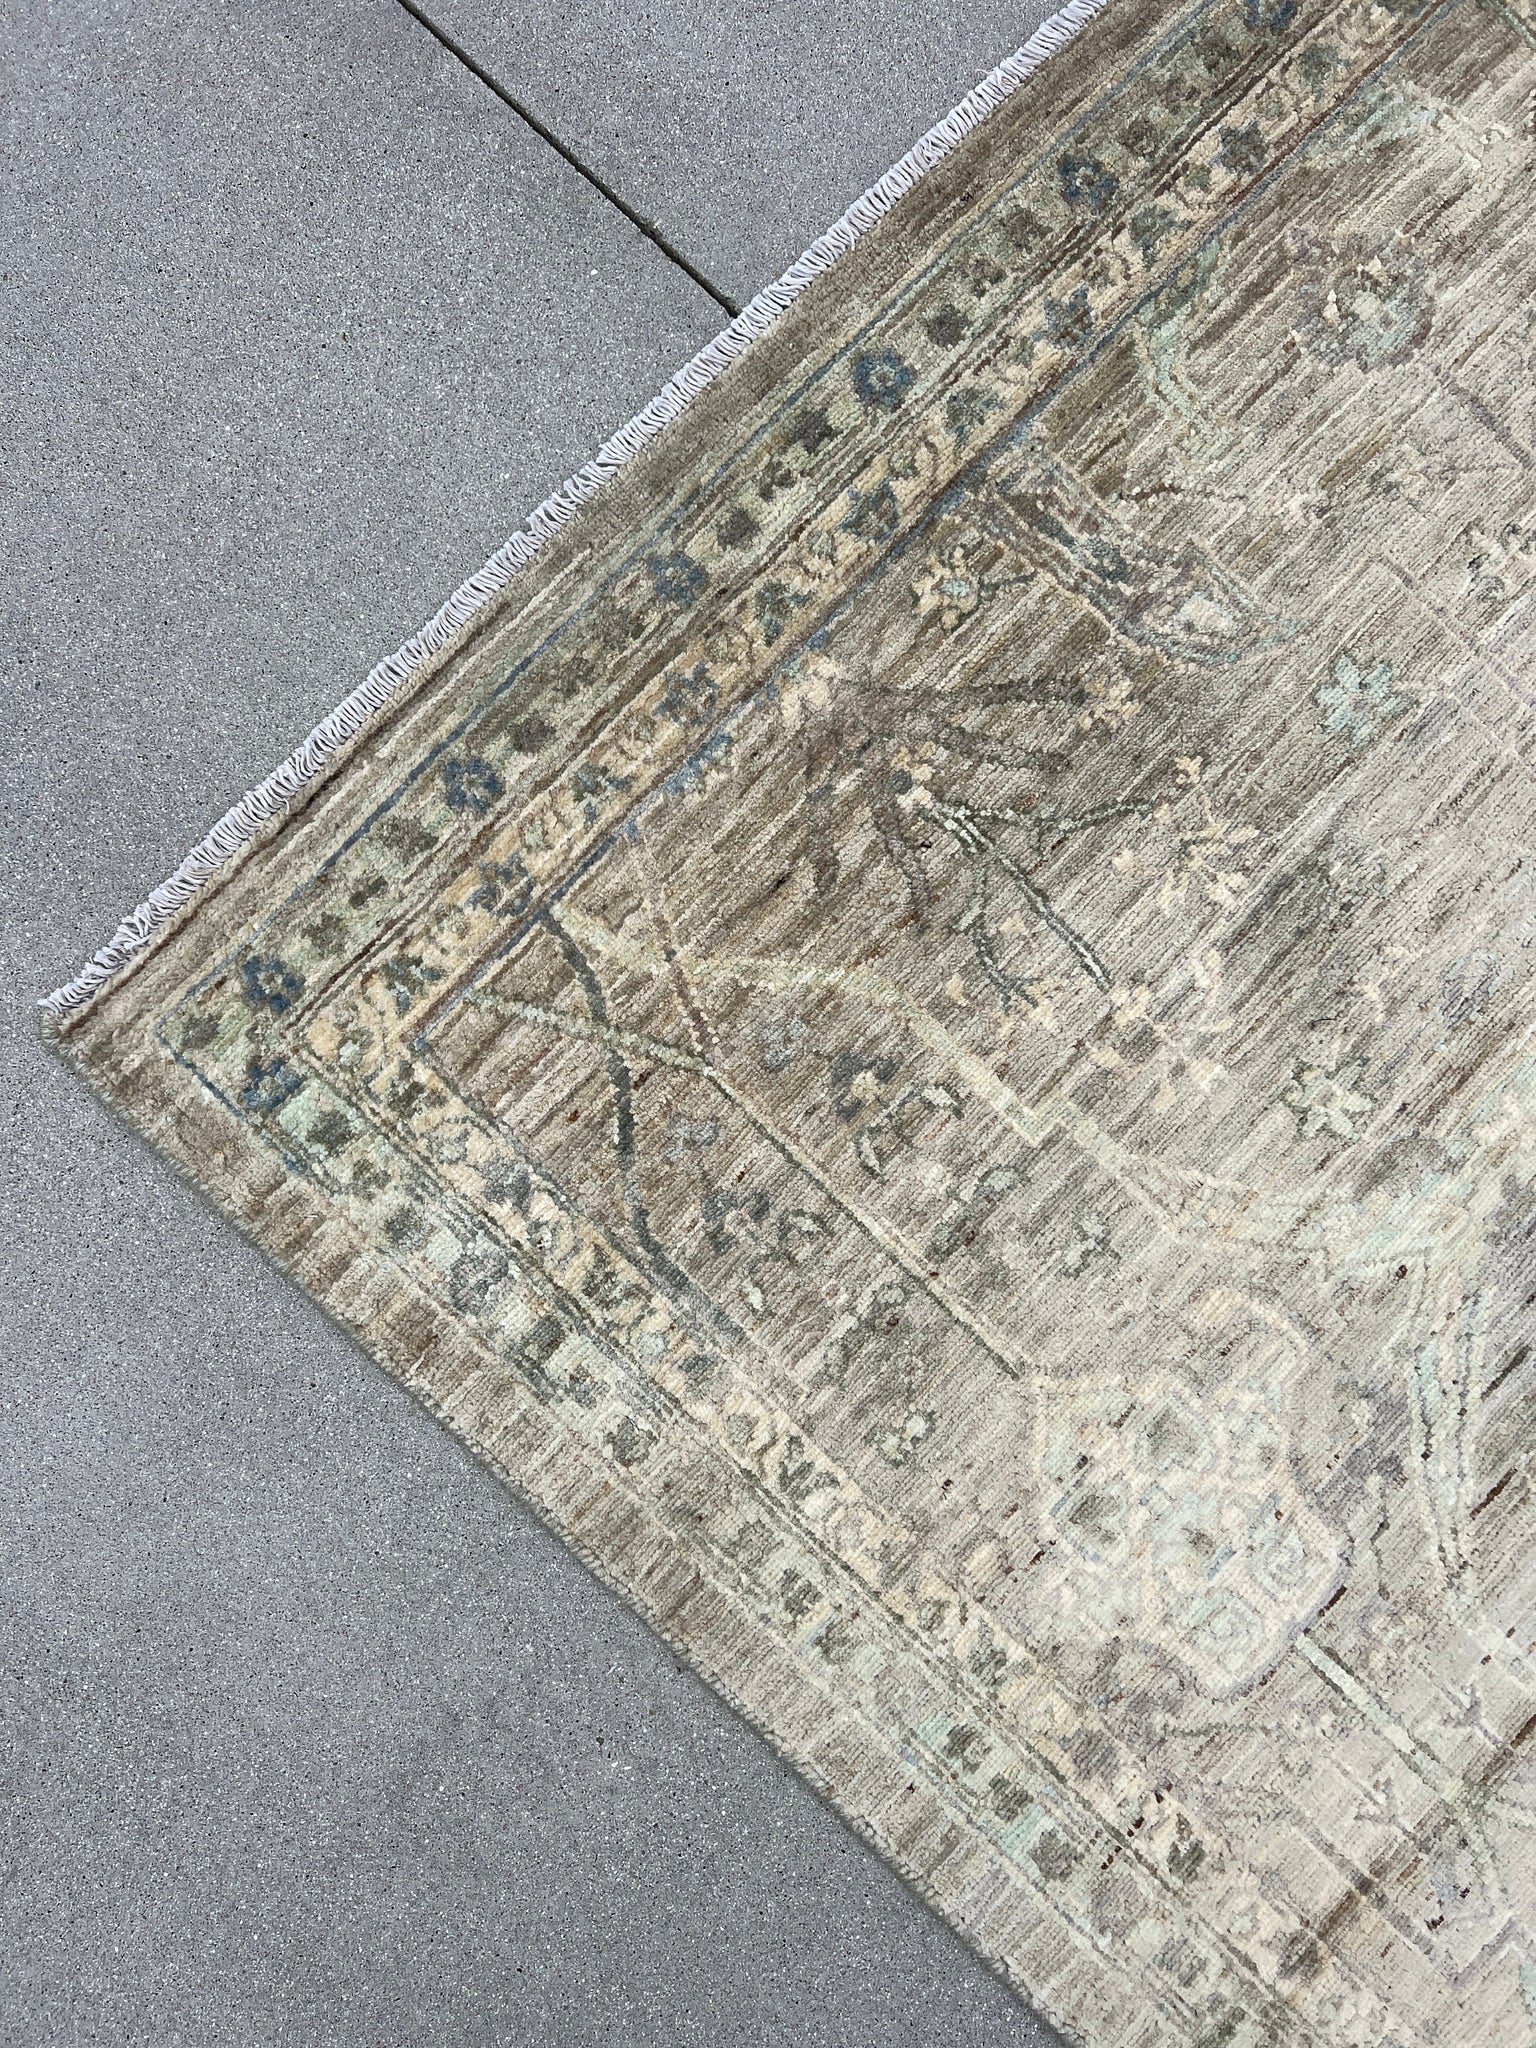 9x12 (270x365) Handmade Afghan Rug | Muted Neutral Brown Gold Grey Mint Tan | Turkish Hand Knotted Oushak Persian Oriental Flatweave Wool